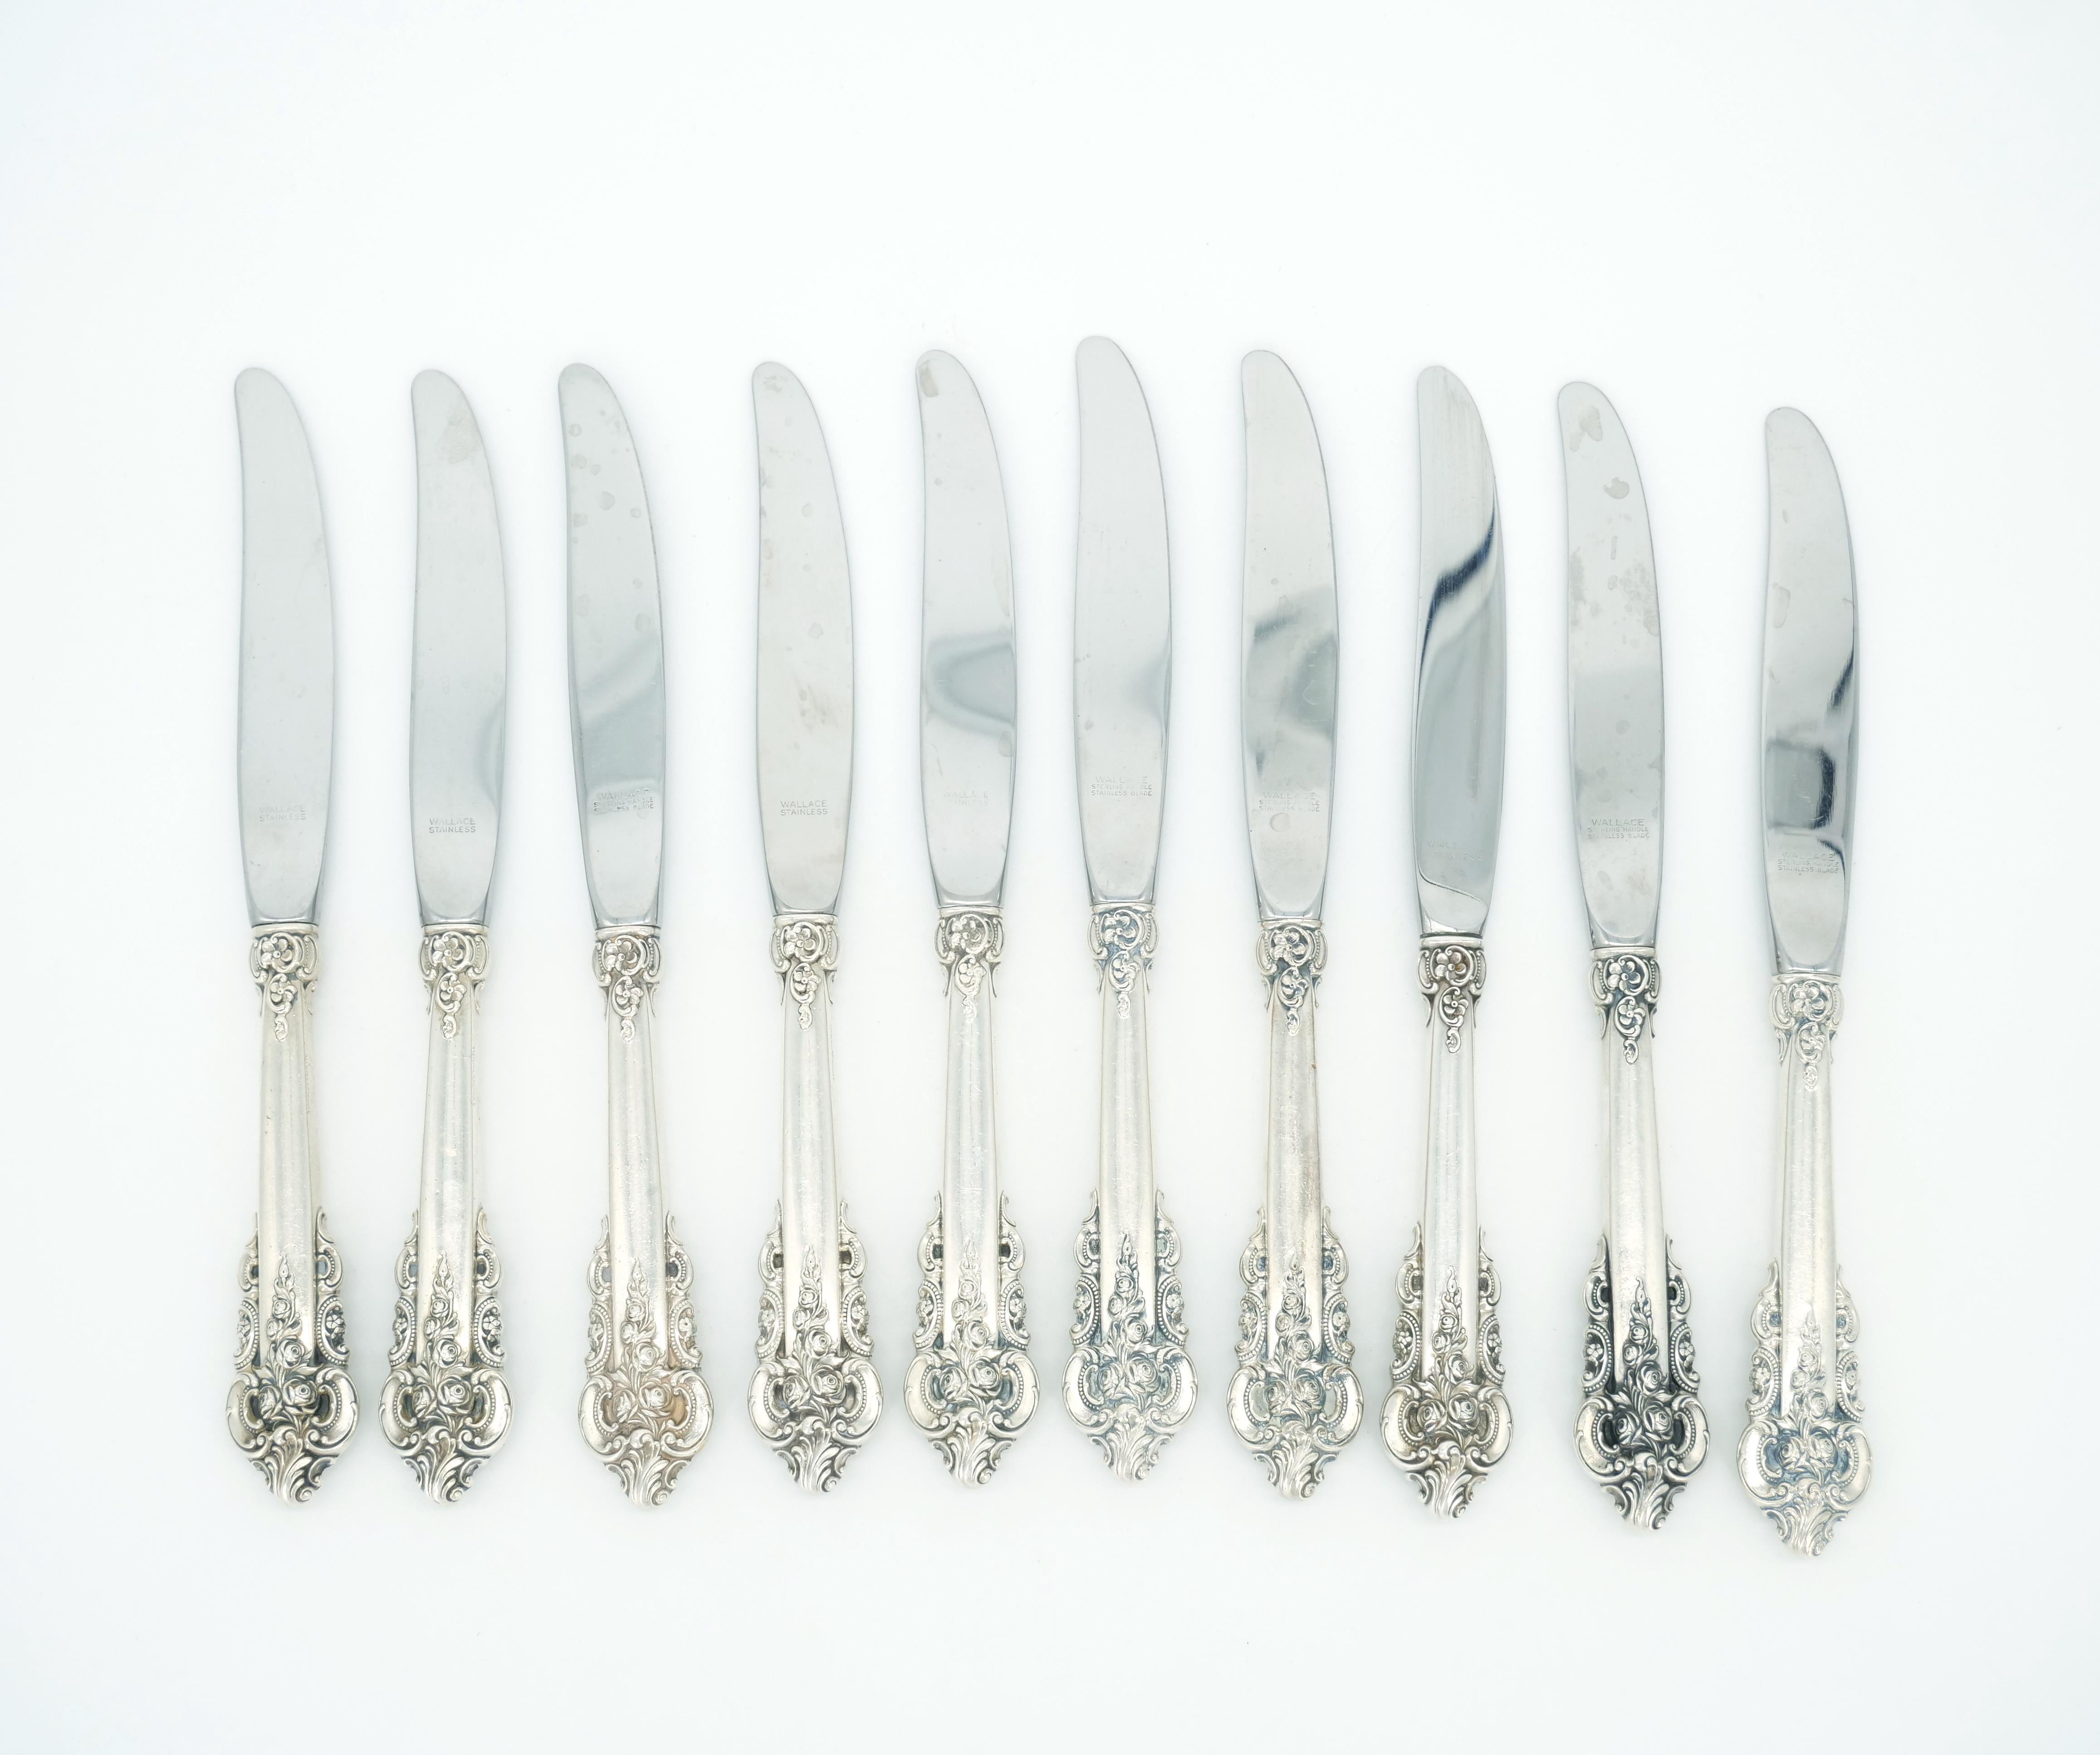 Engraved Early 20th Century Sterling Silver Flatware Service For 24 People For Sale